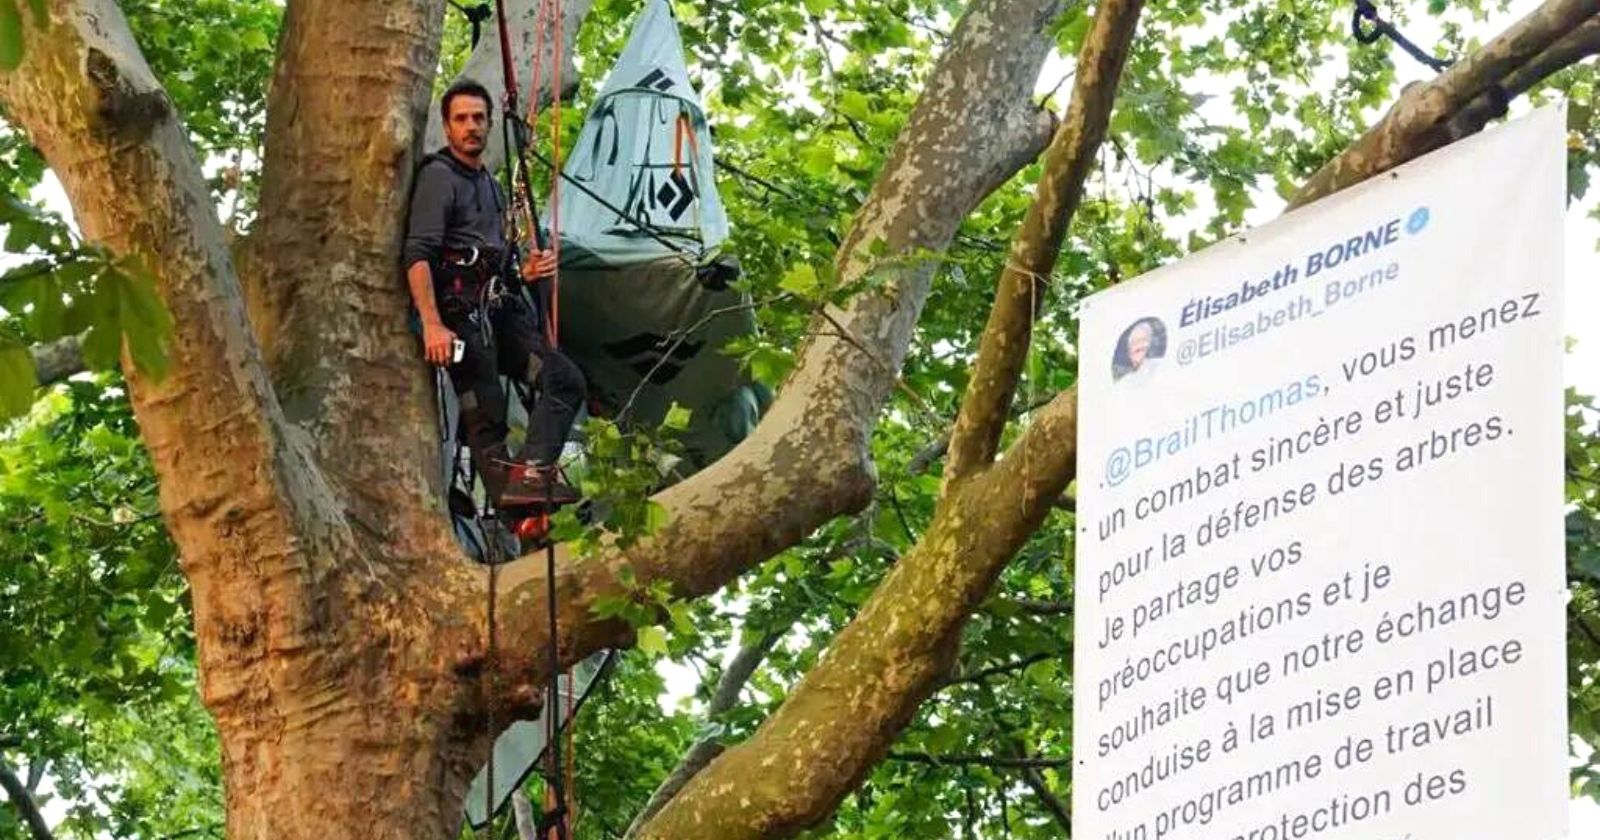 INTERVIEW.  "We won't let go": This defender of nature clings to trees to save them